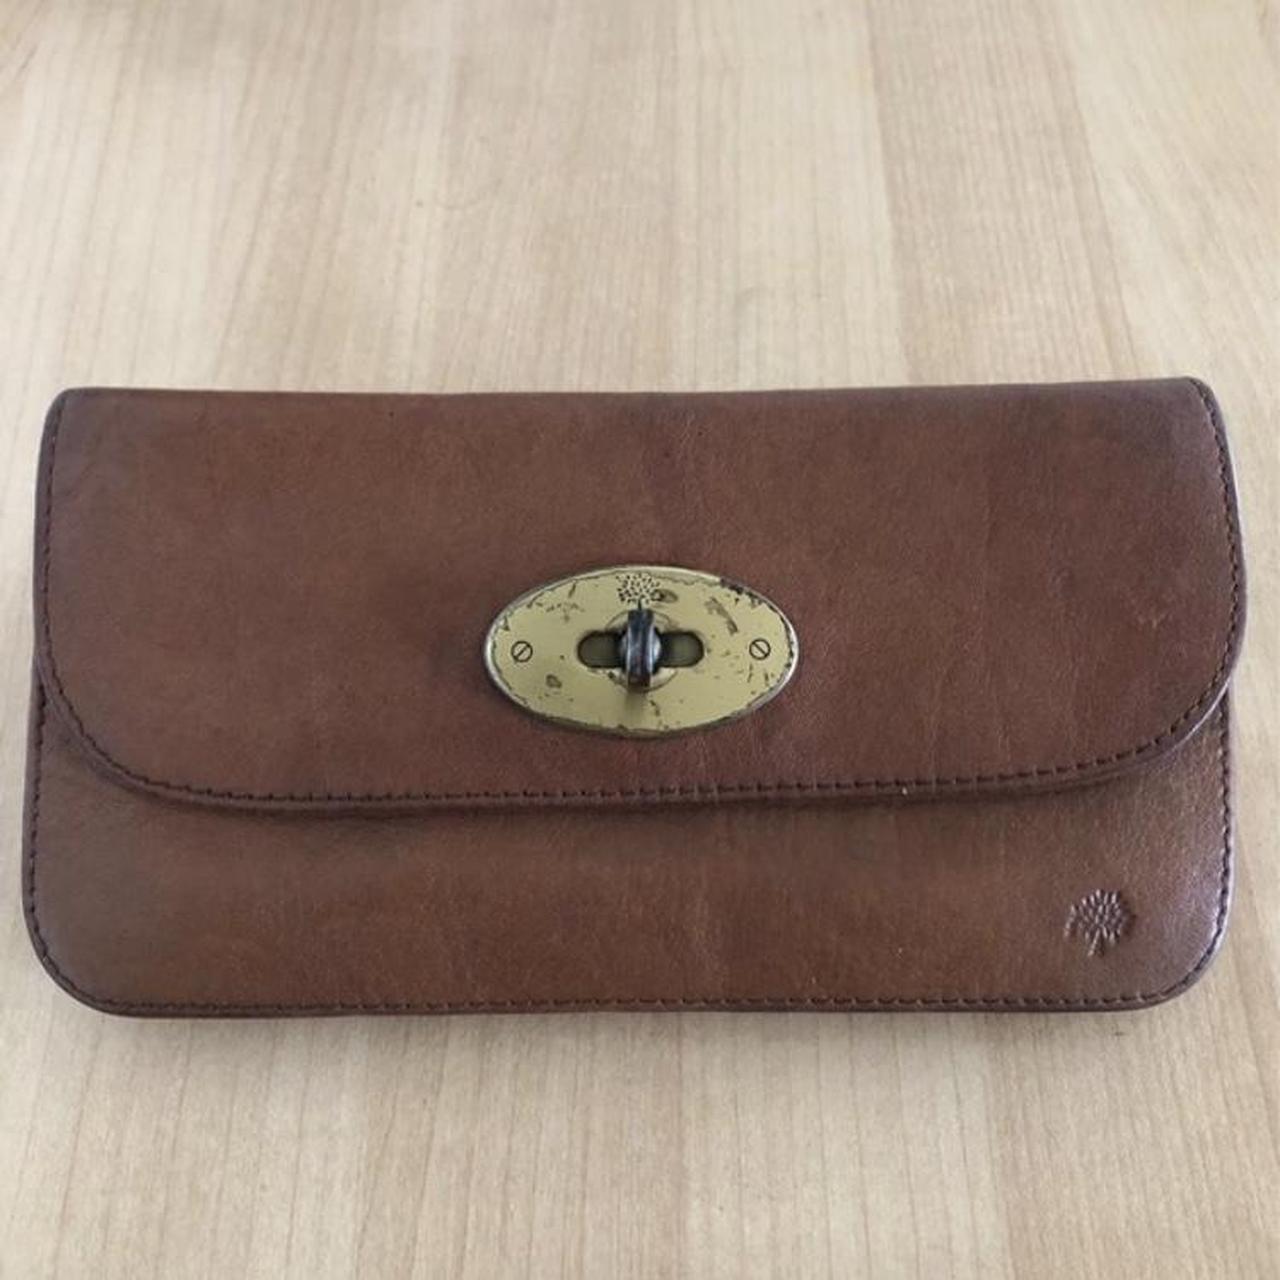 Vintage Mulberry Brown Leather Wallet.#Mulberry... - Depop